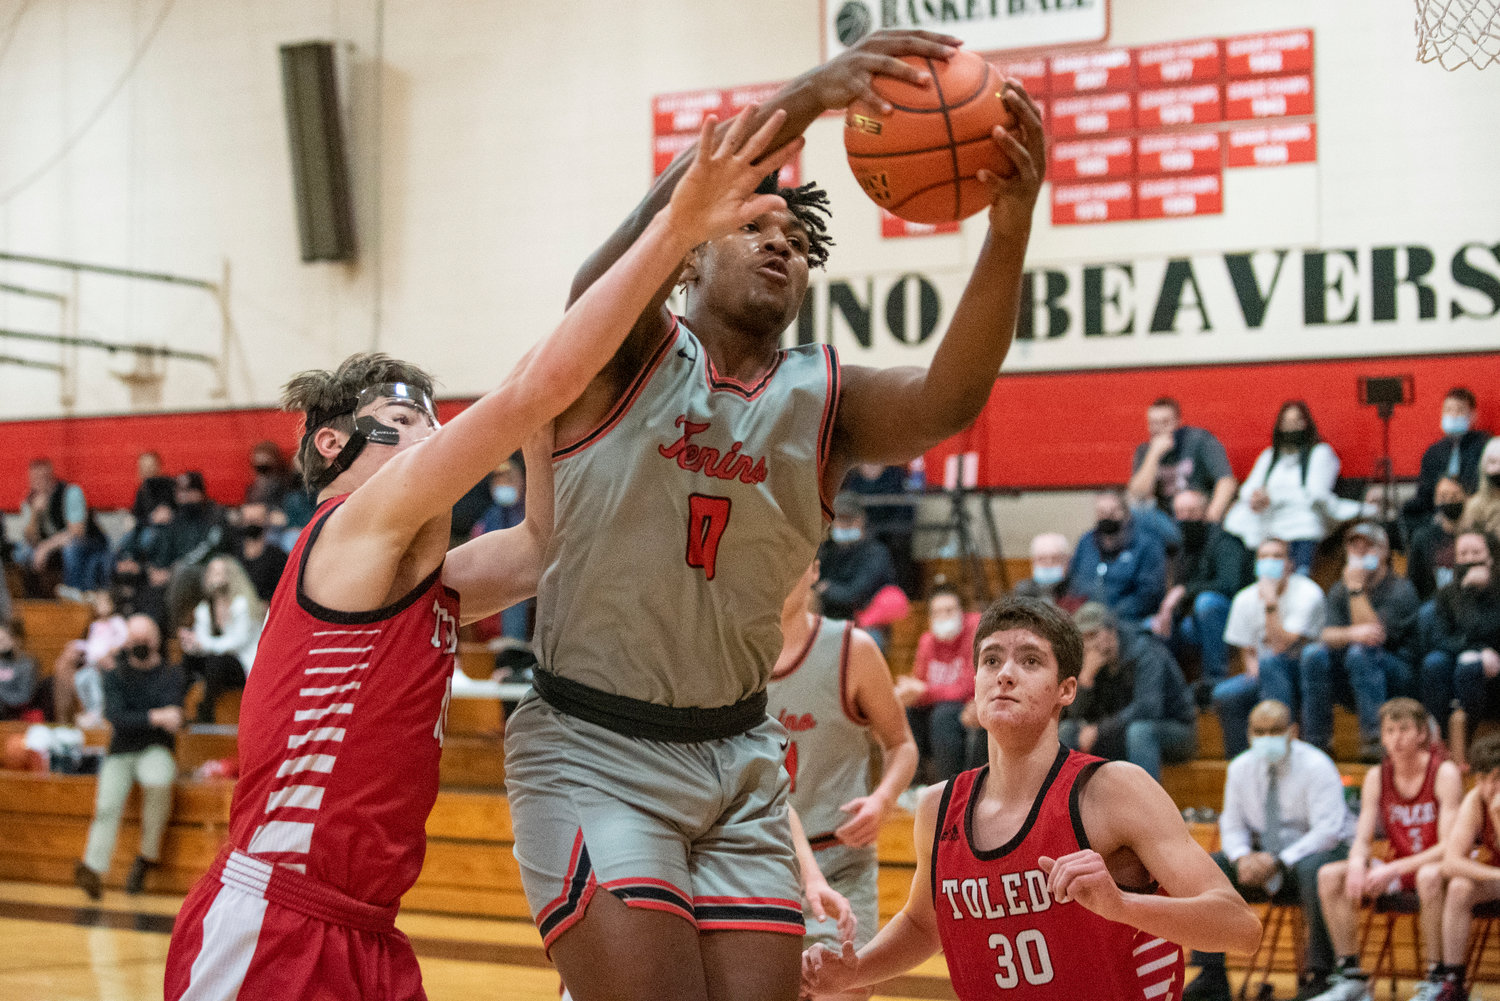 Tenino's Takari Hickle receives a pass in the paint during a home game against Toledo on Dec. 22.